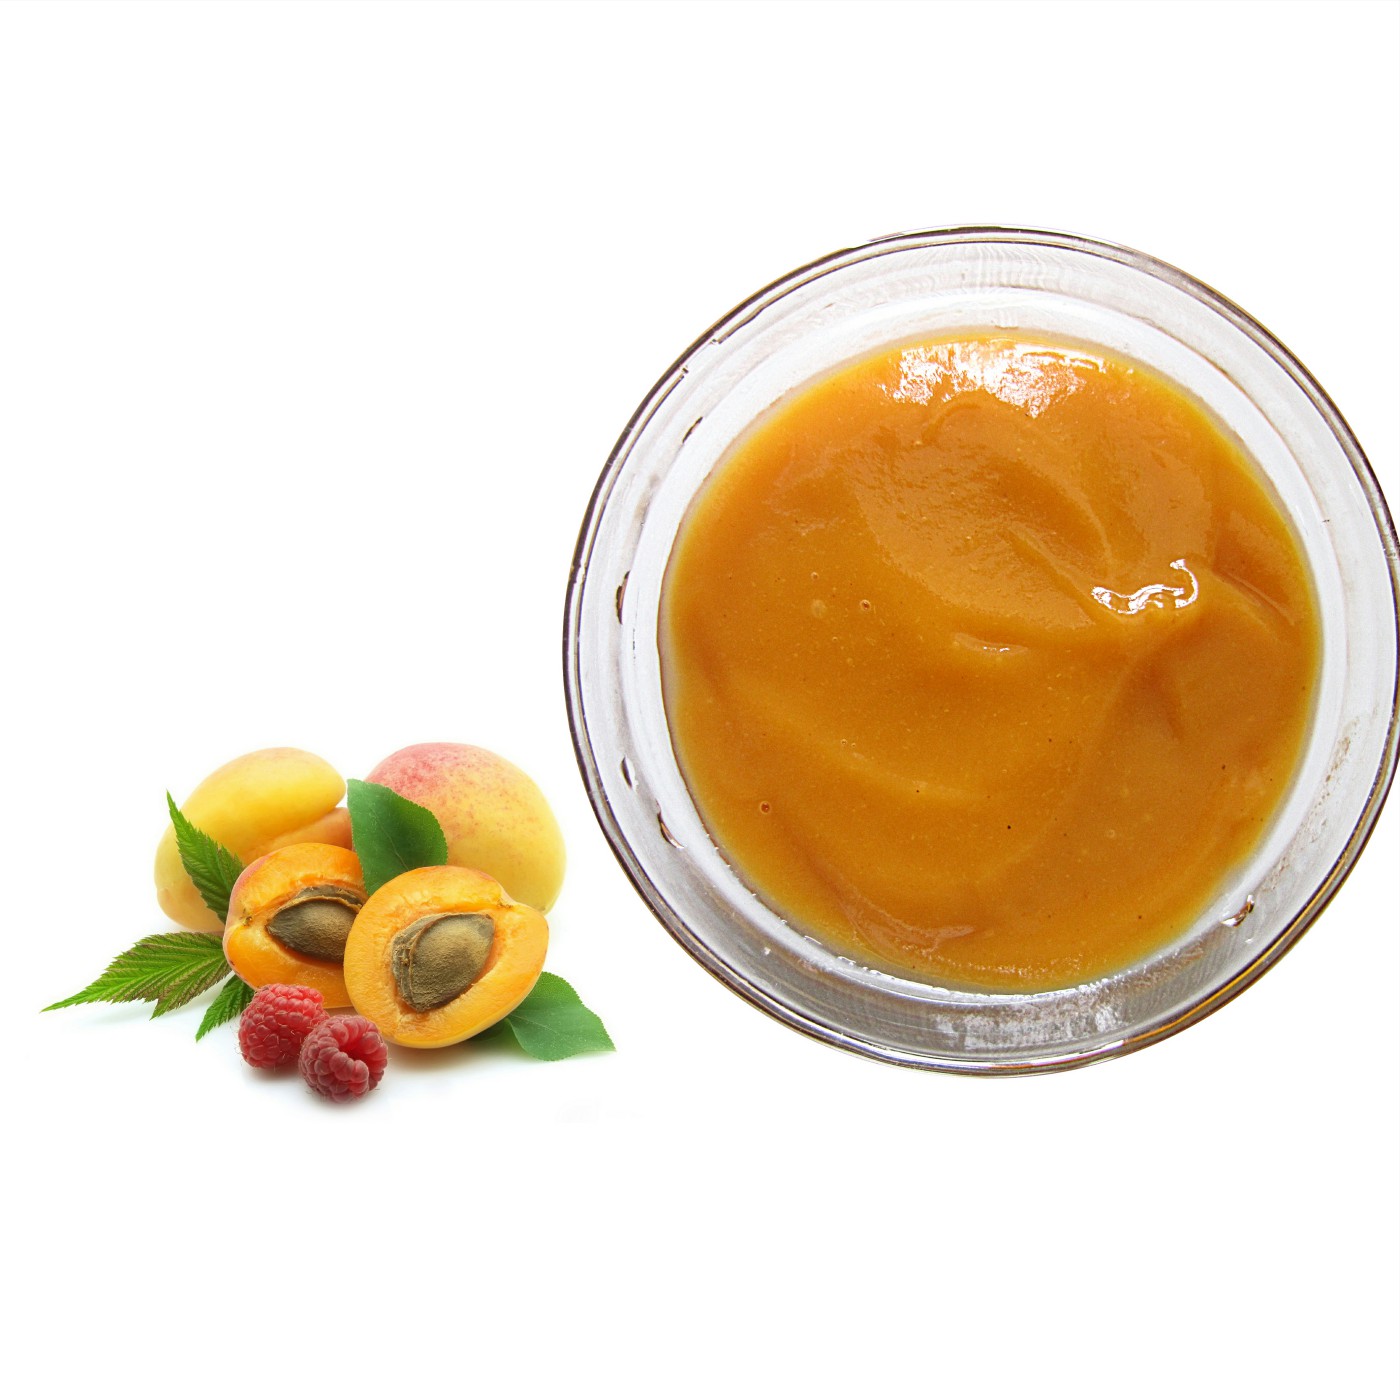 Apricot puree concentrate